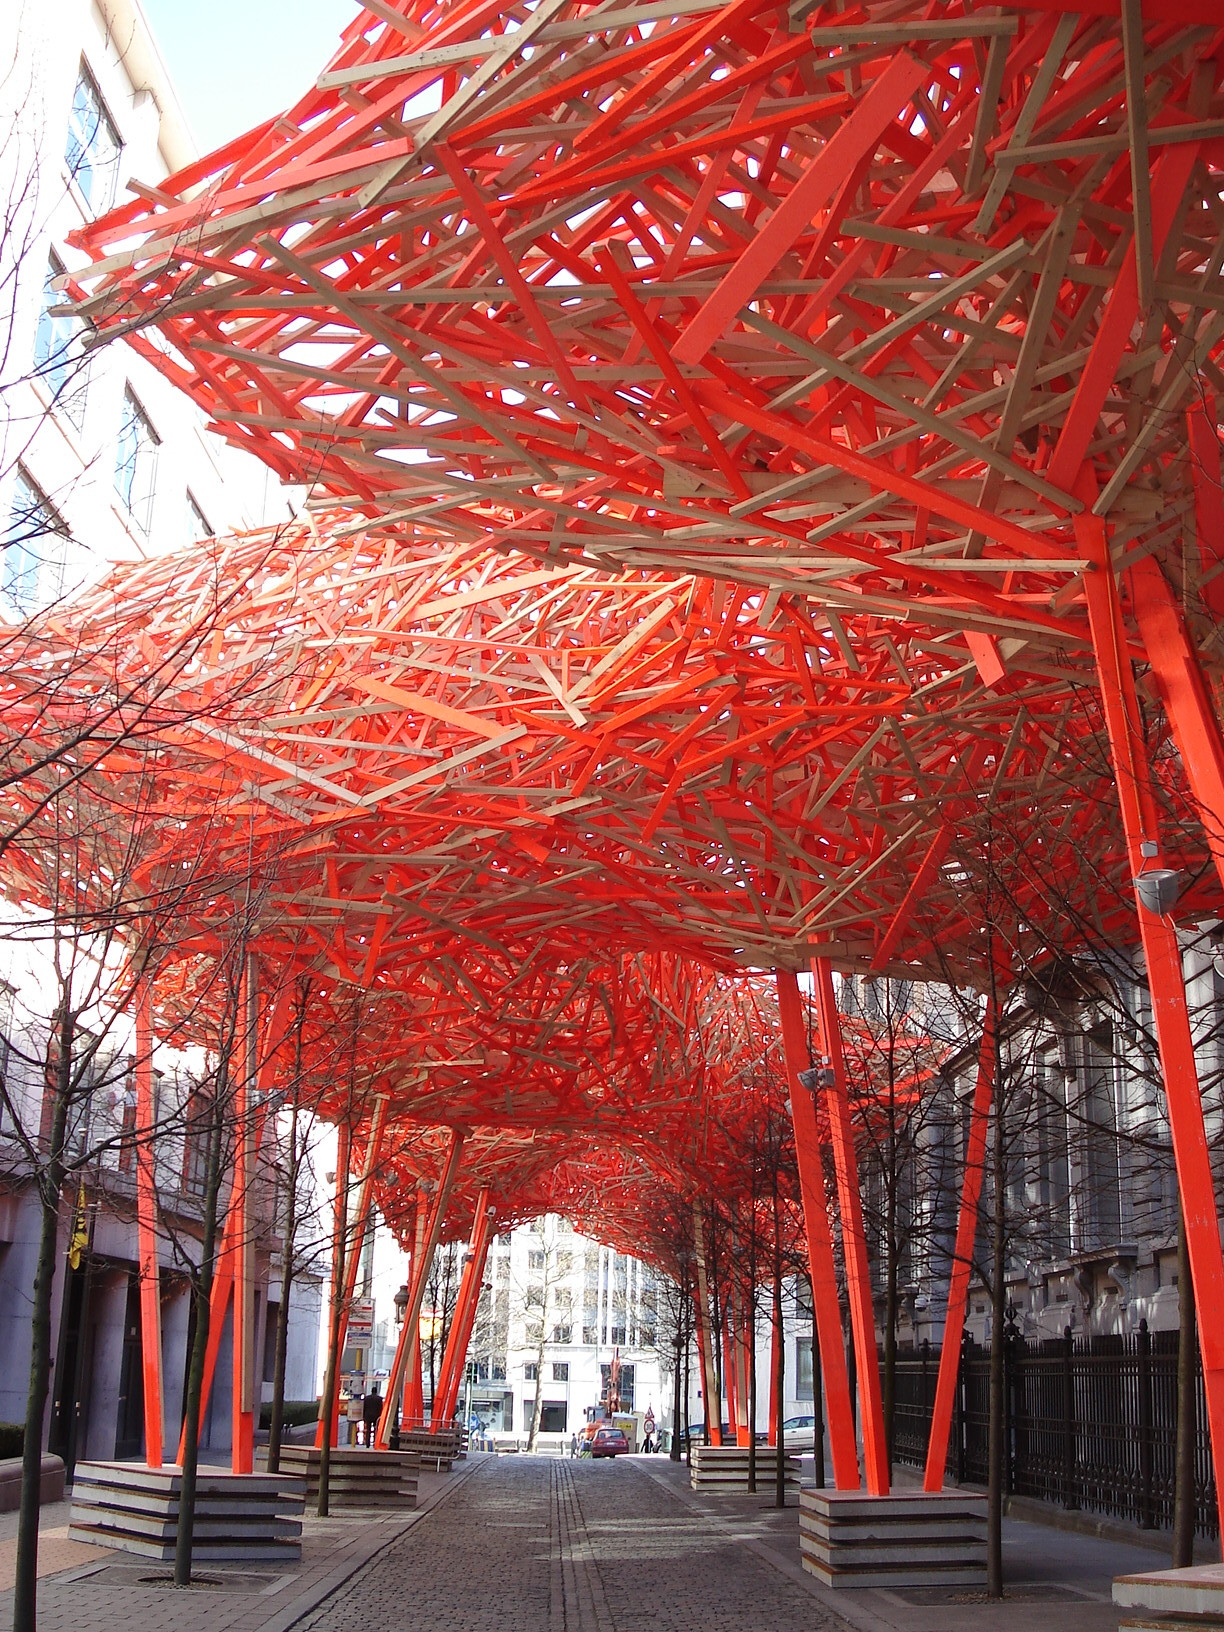 that-guy-loves-neon-wood:
“ Sequence (2008) at the Belgium Parlement.
”